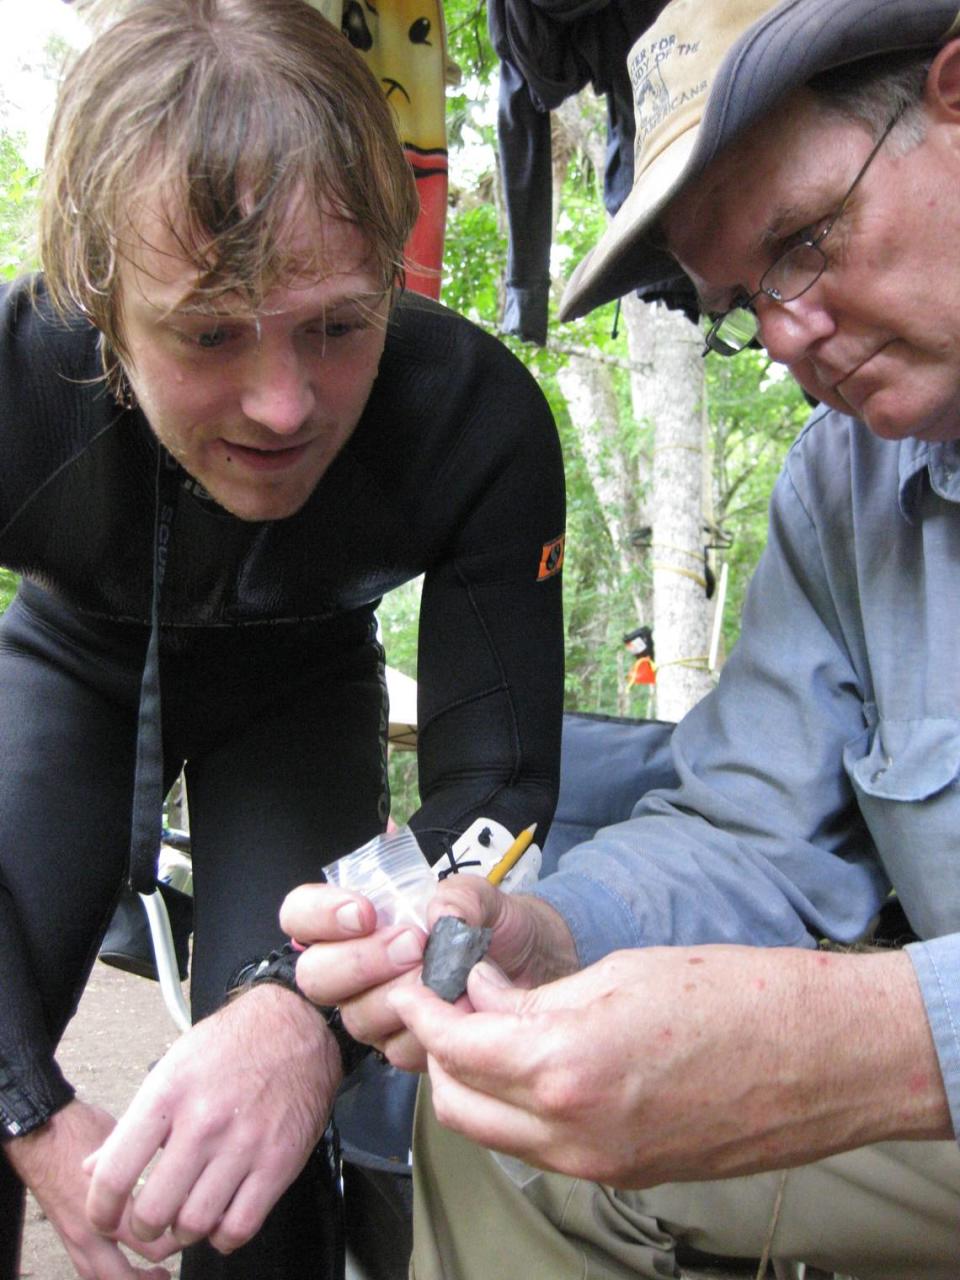 Morgan Smith (left), an associate professor of anthropology at the University of Tennessee at Chattanooga, and Michael R. Waters, an archaeology professor at Texas A&M University, examine a 14,500-year-old stone knife discovered in the Aucilla River by Smith and his dive buddy John Albertson.